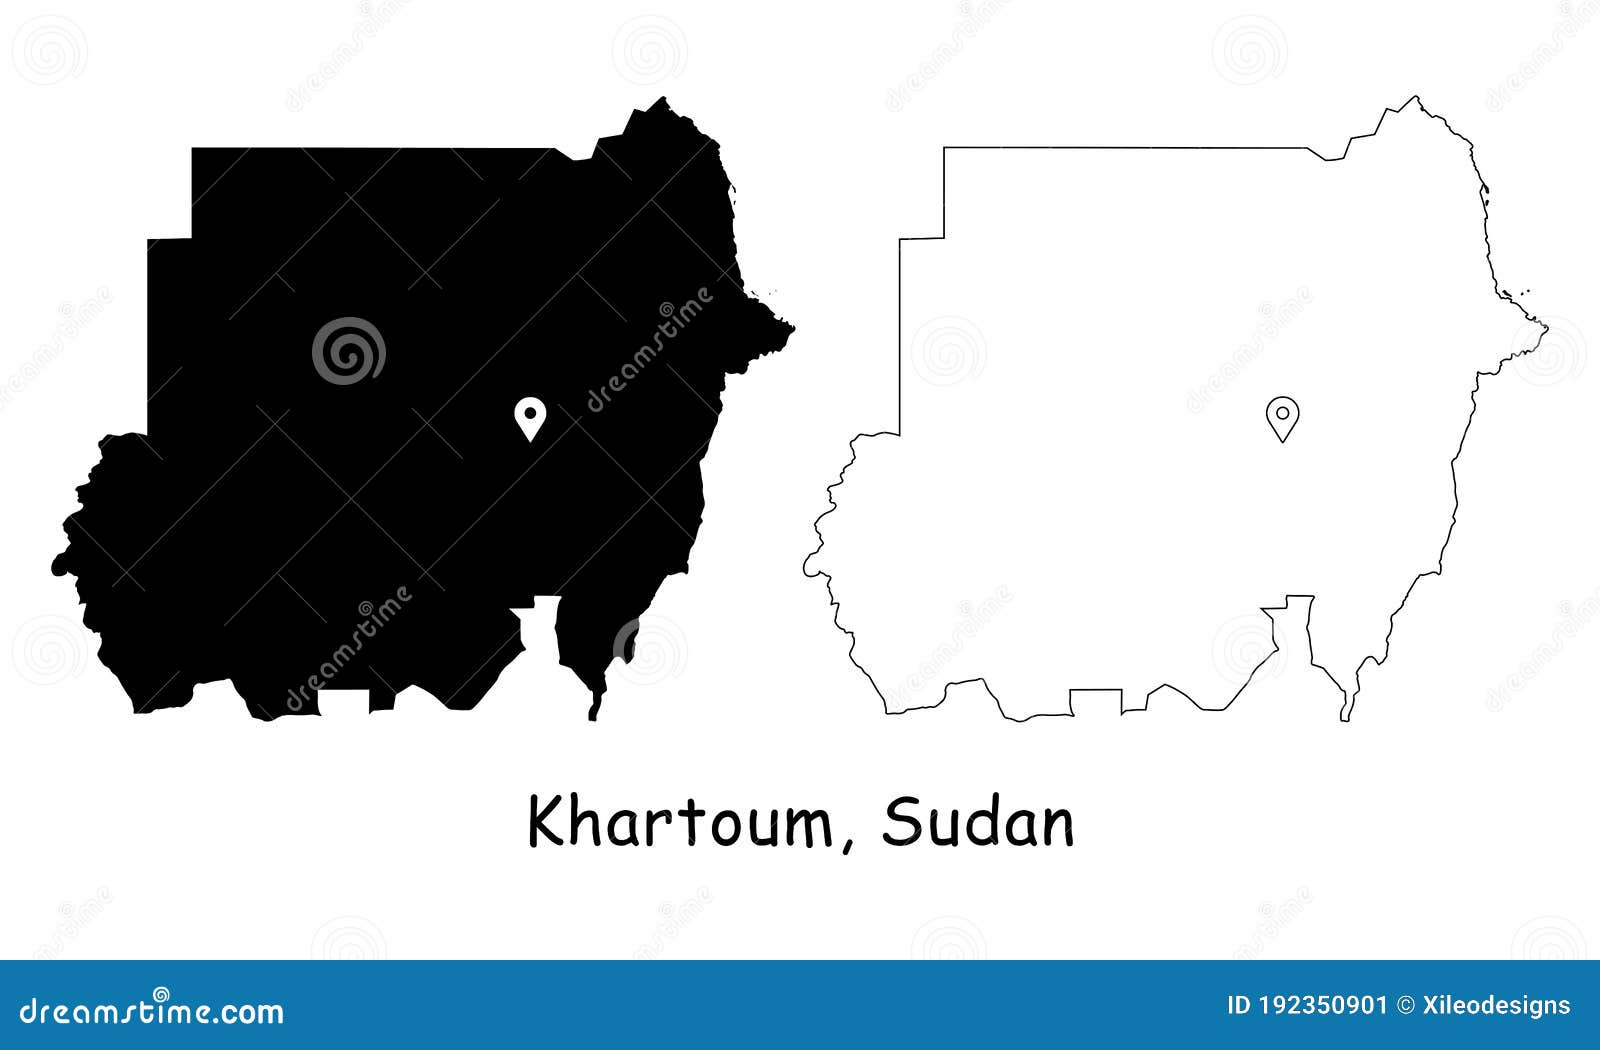 Khartoum Sudan Detailed Country Map With Location Pin On Capital City